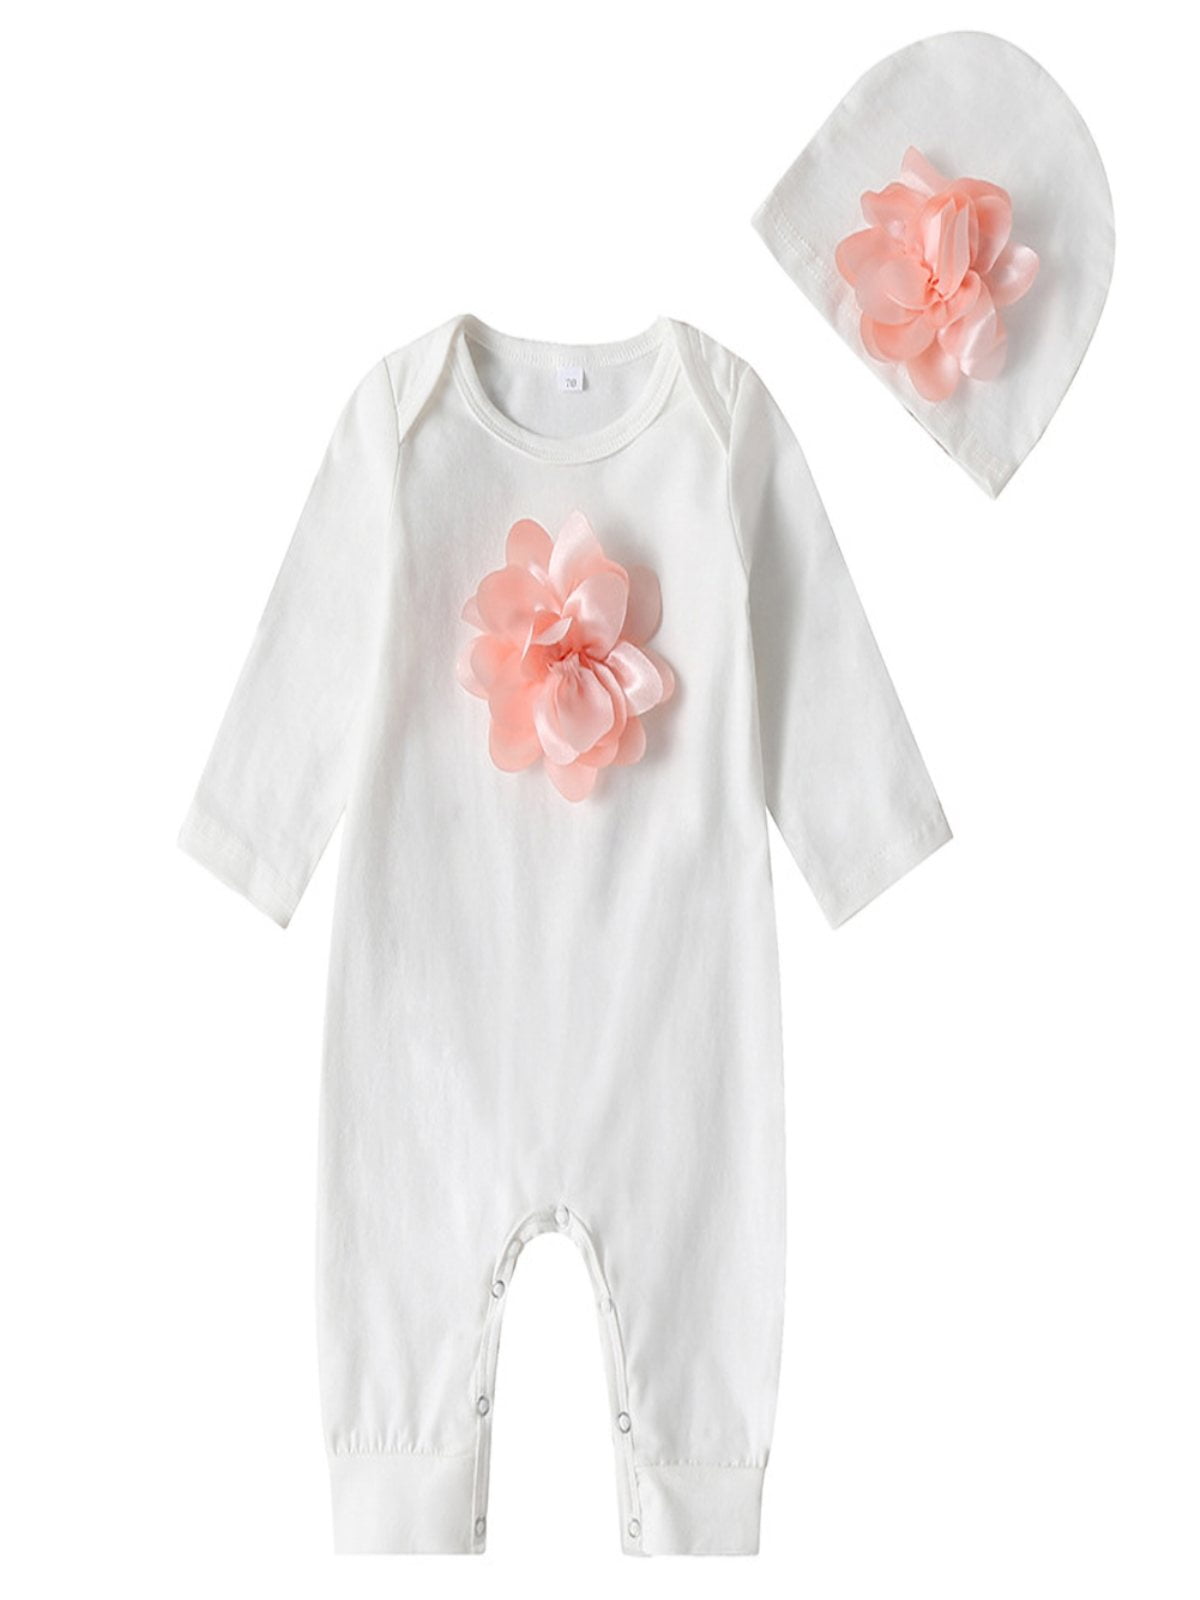 Details about   Long Sleeve Cotton Baby Girls Rompers Cotton Newborn Infants Jumpsuit Outfits 